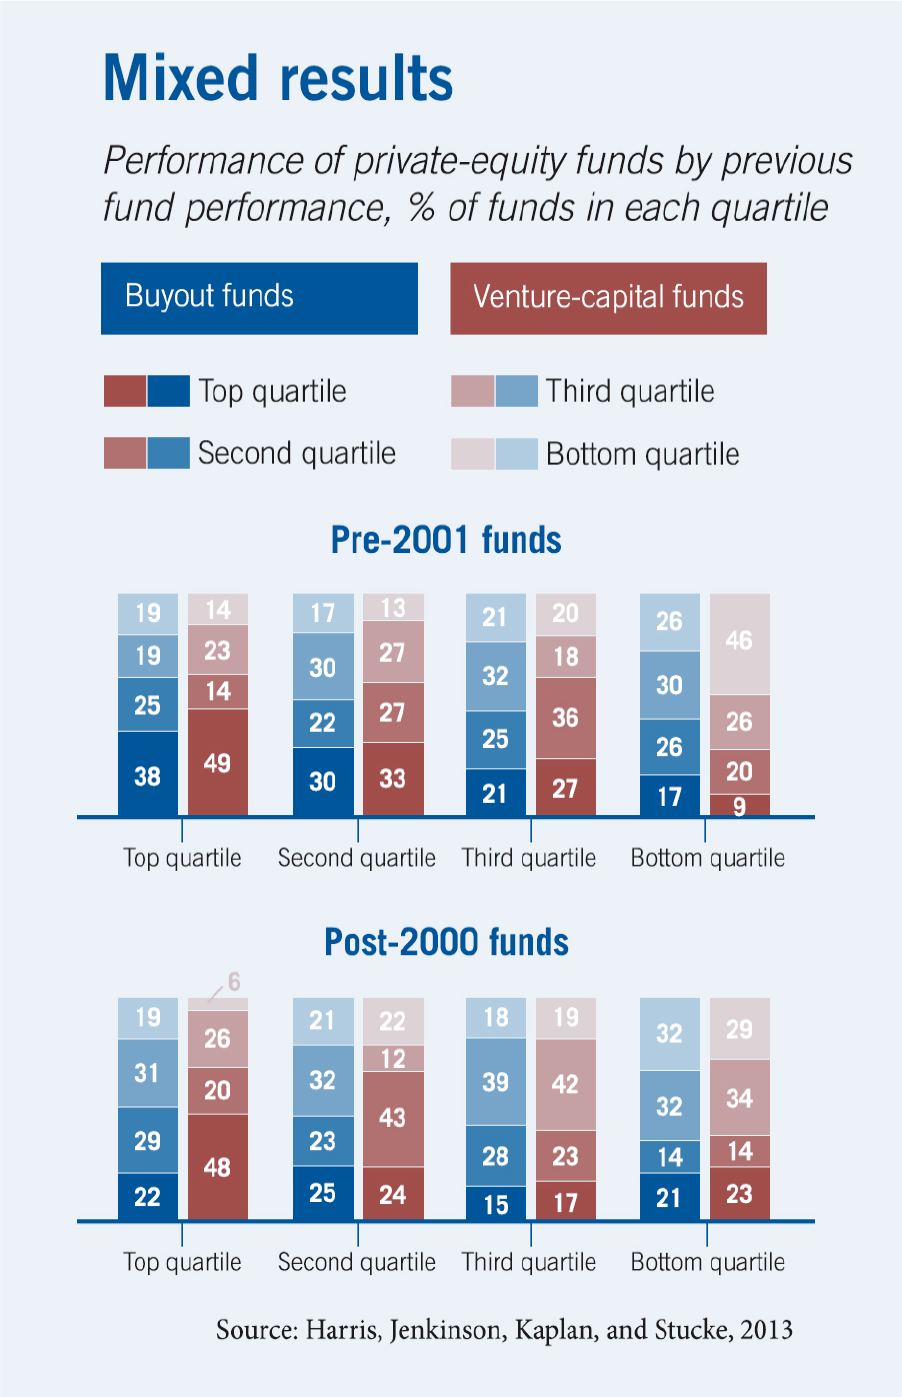 A series of stacked column bar charts on a one hundred percent scale shows that managers who had run a top-quartile buyout fund previously did so again thirty-eight percent of the time over the years of 1984 to 2000, but only twenty-two percent of the time over 2001 to 2008. Among managers who had run a top-quartile venture-capital fund previously did so again forty-nine percent of the time over 1984 to 2000, and forty eight percent of the time over 2001 to 2008.s